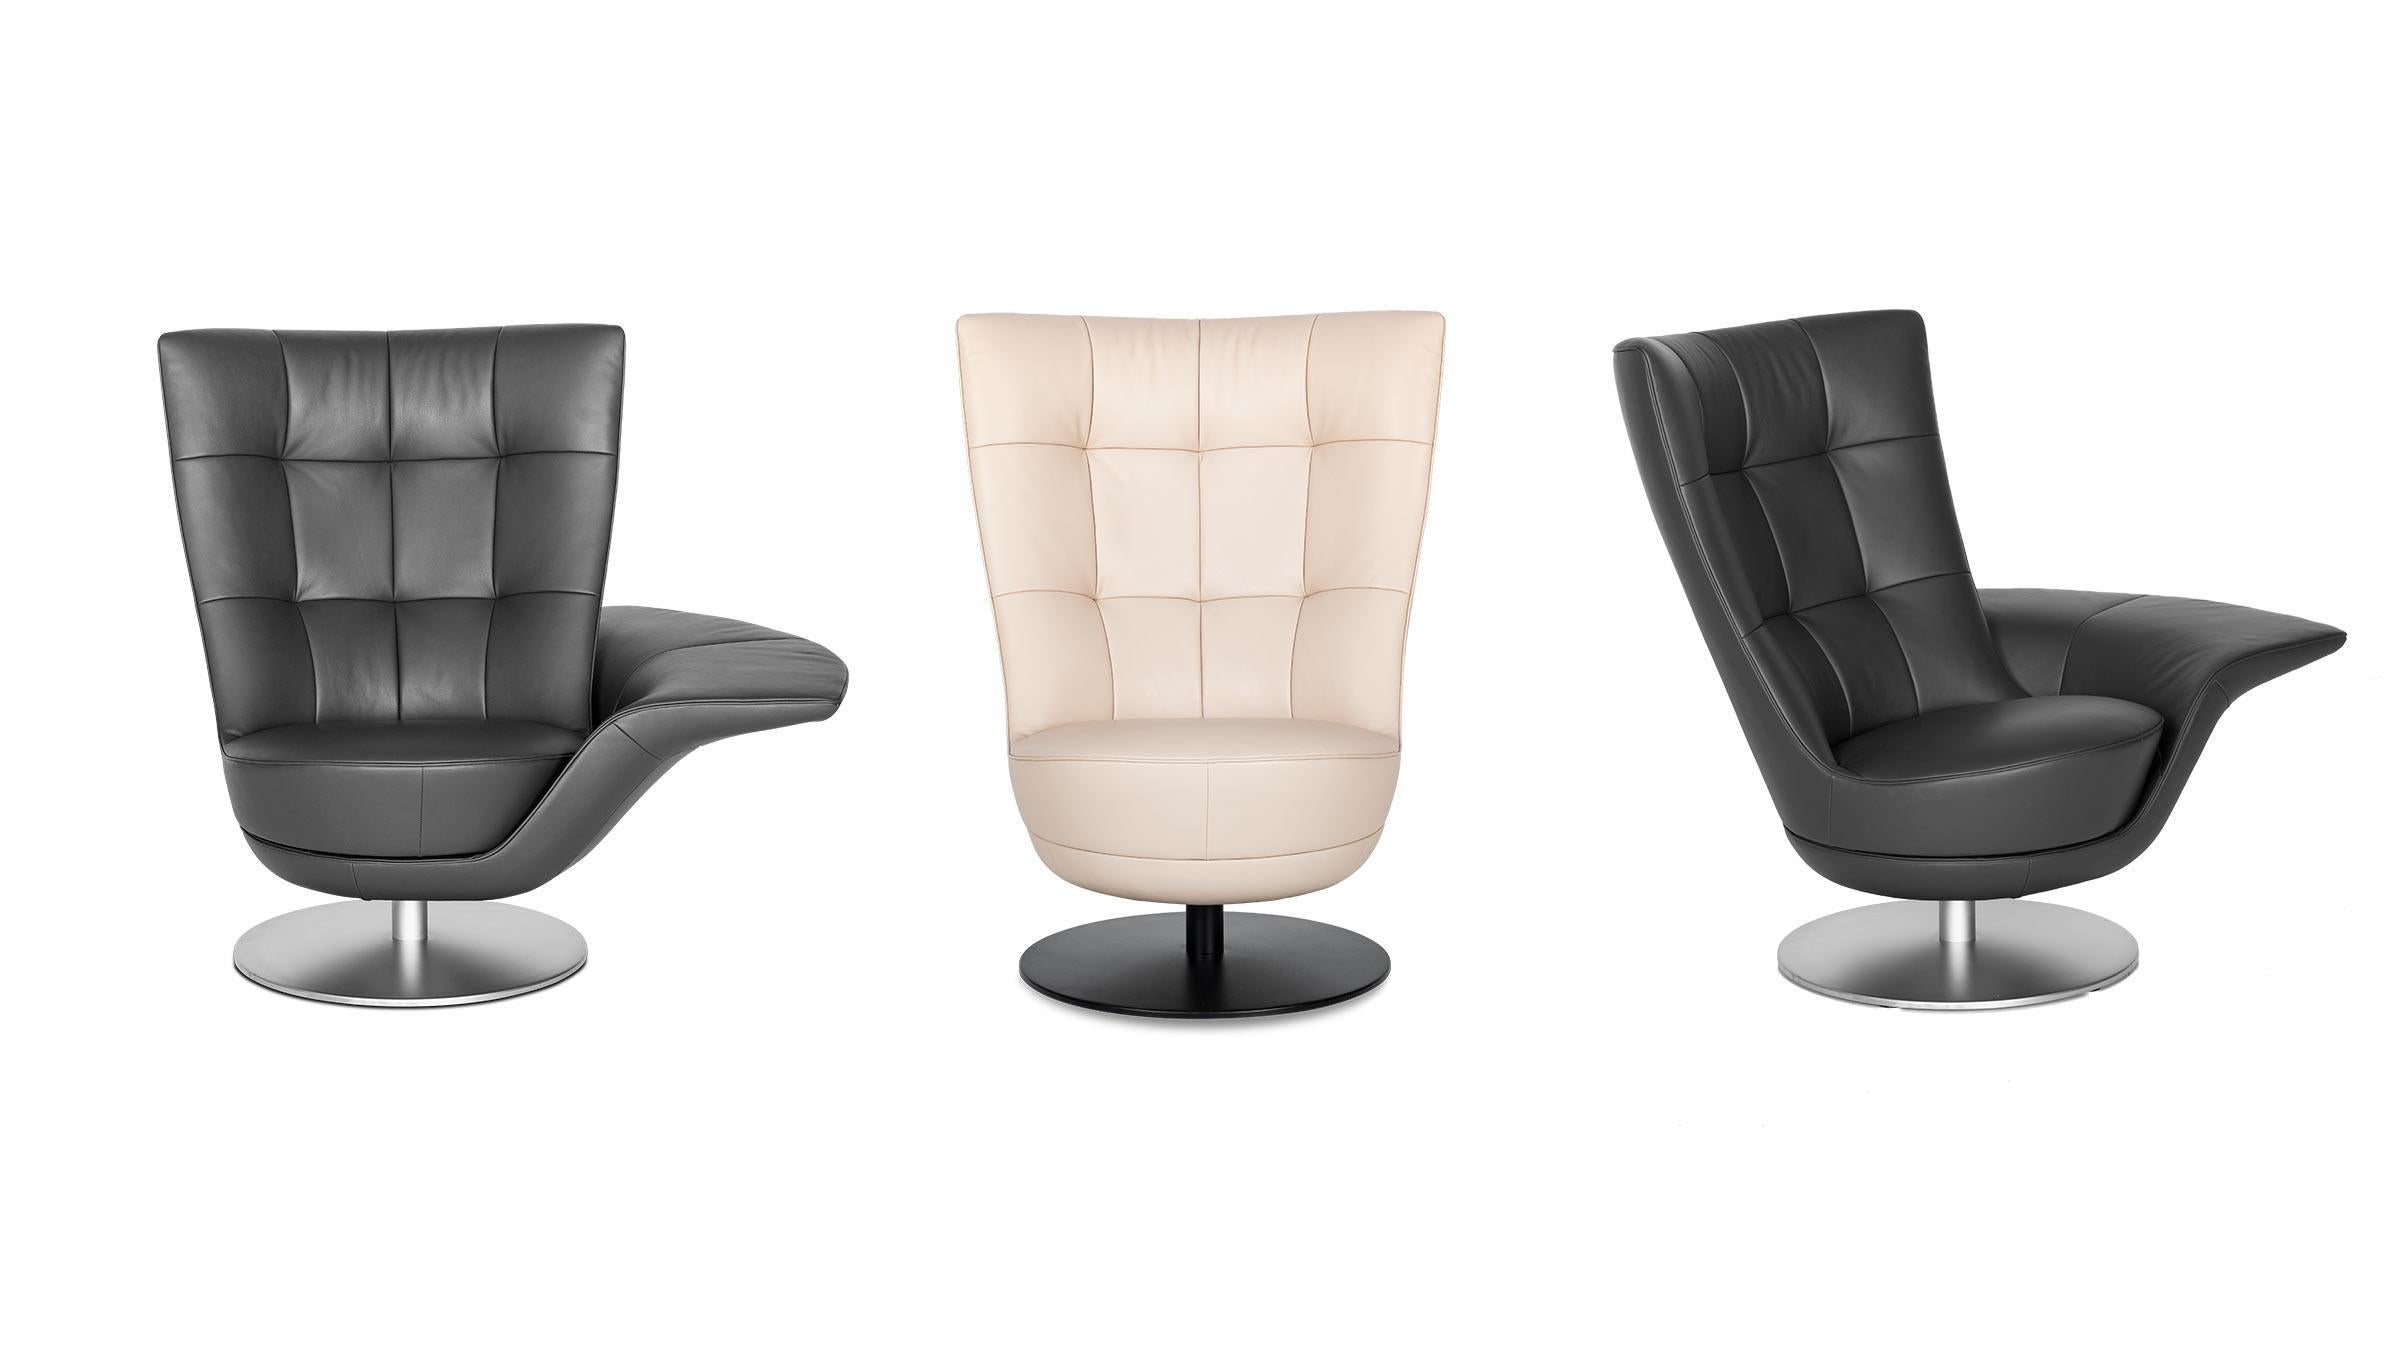 Unimagined flexibility, thanks to two armchair parts. The architecture of the armchair is based on two parts, each able to swivel about its own axis. Depending on how the two chair parts are rotated relative to one another, the lower part can be